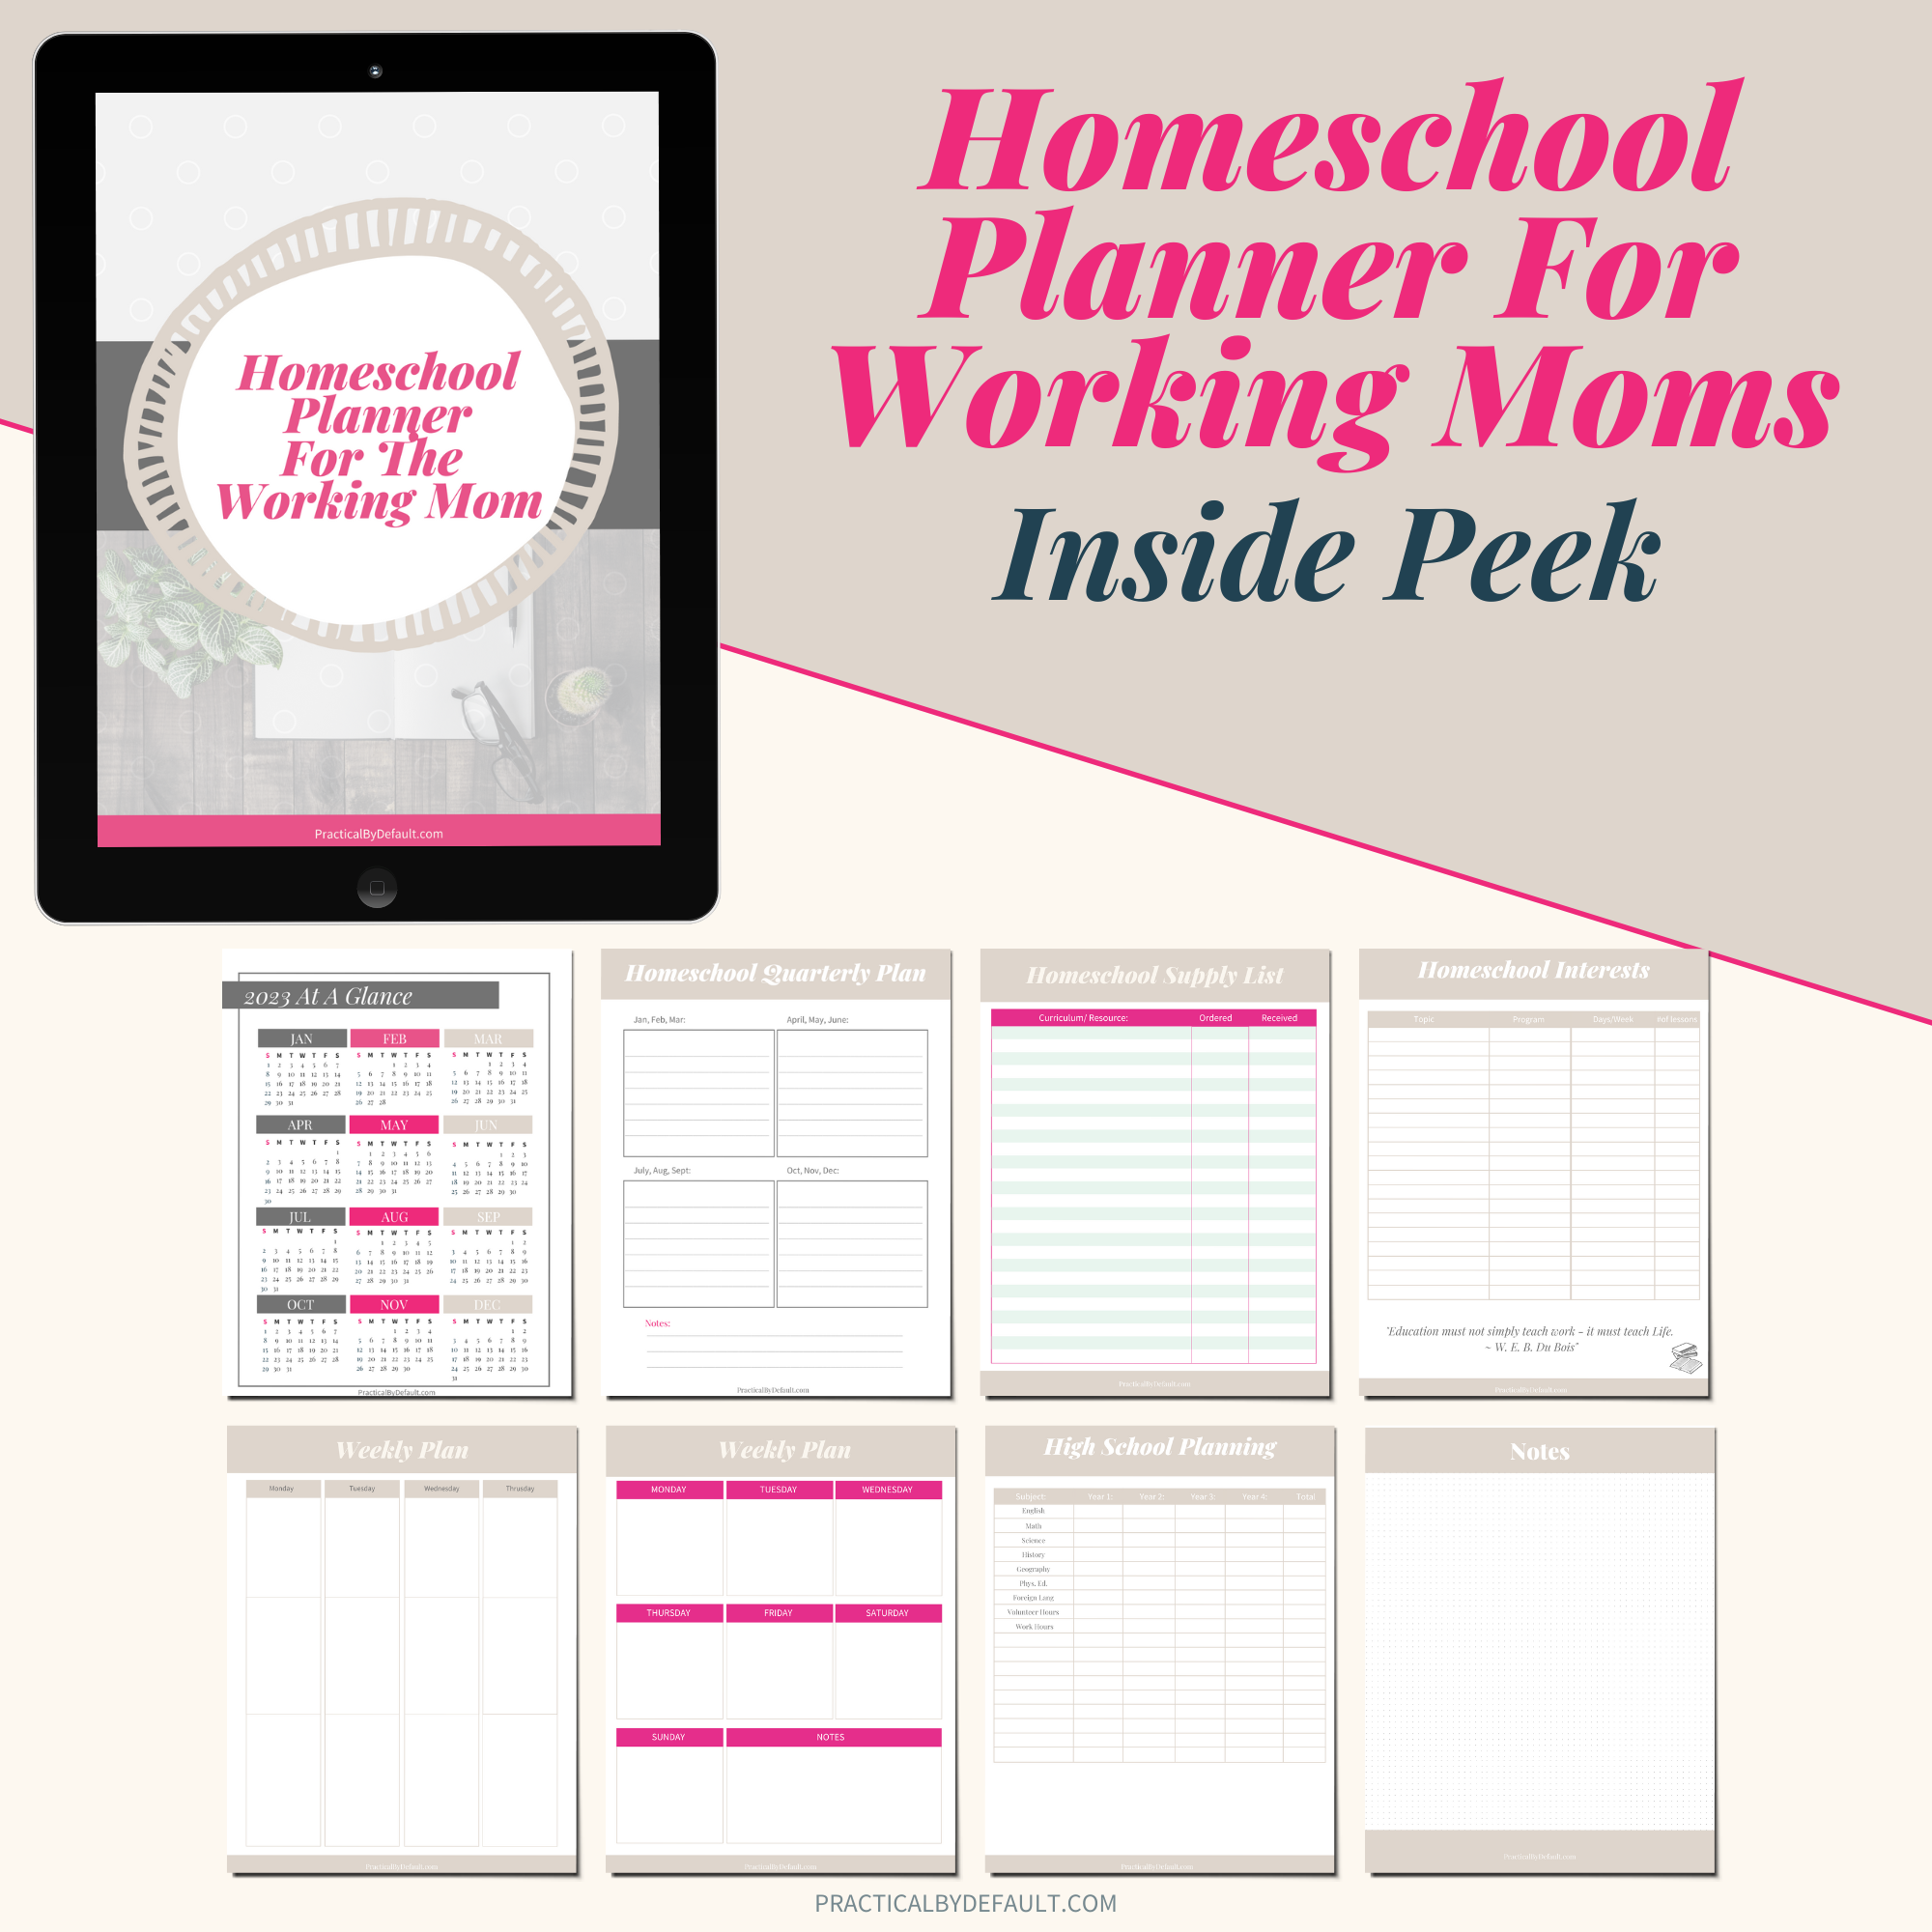 Inside pages of the Homeschool planner